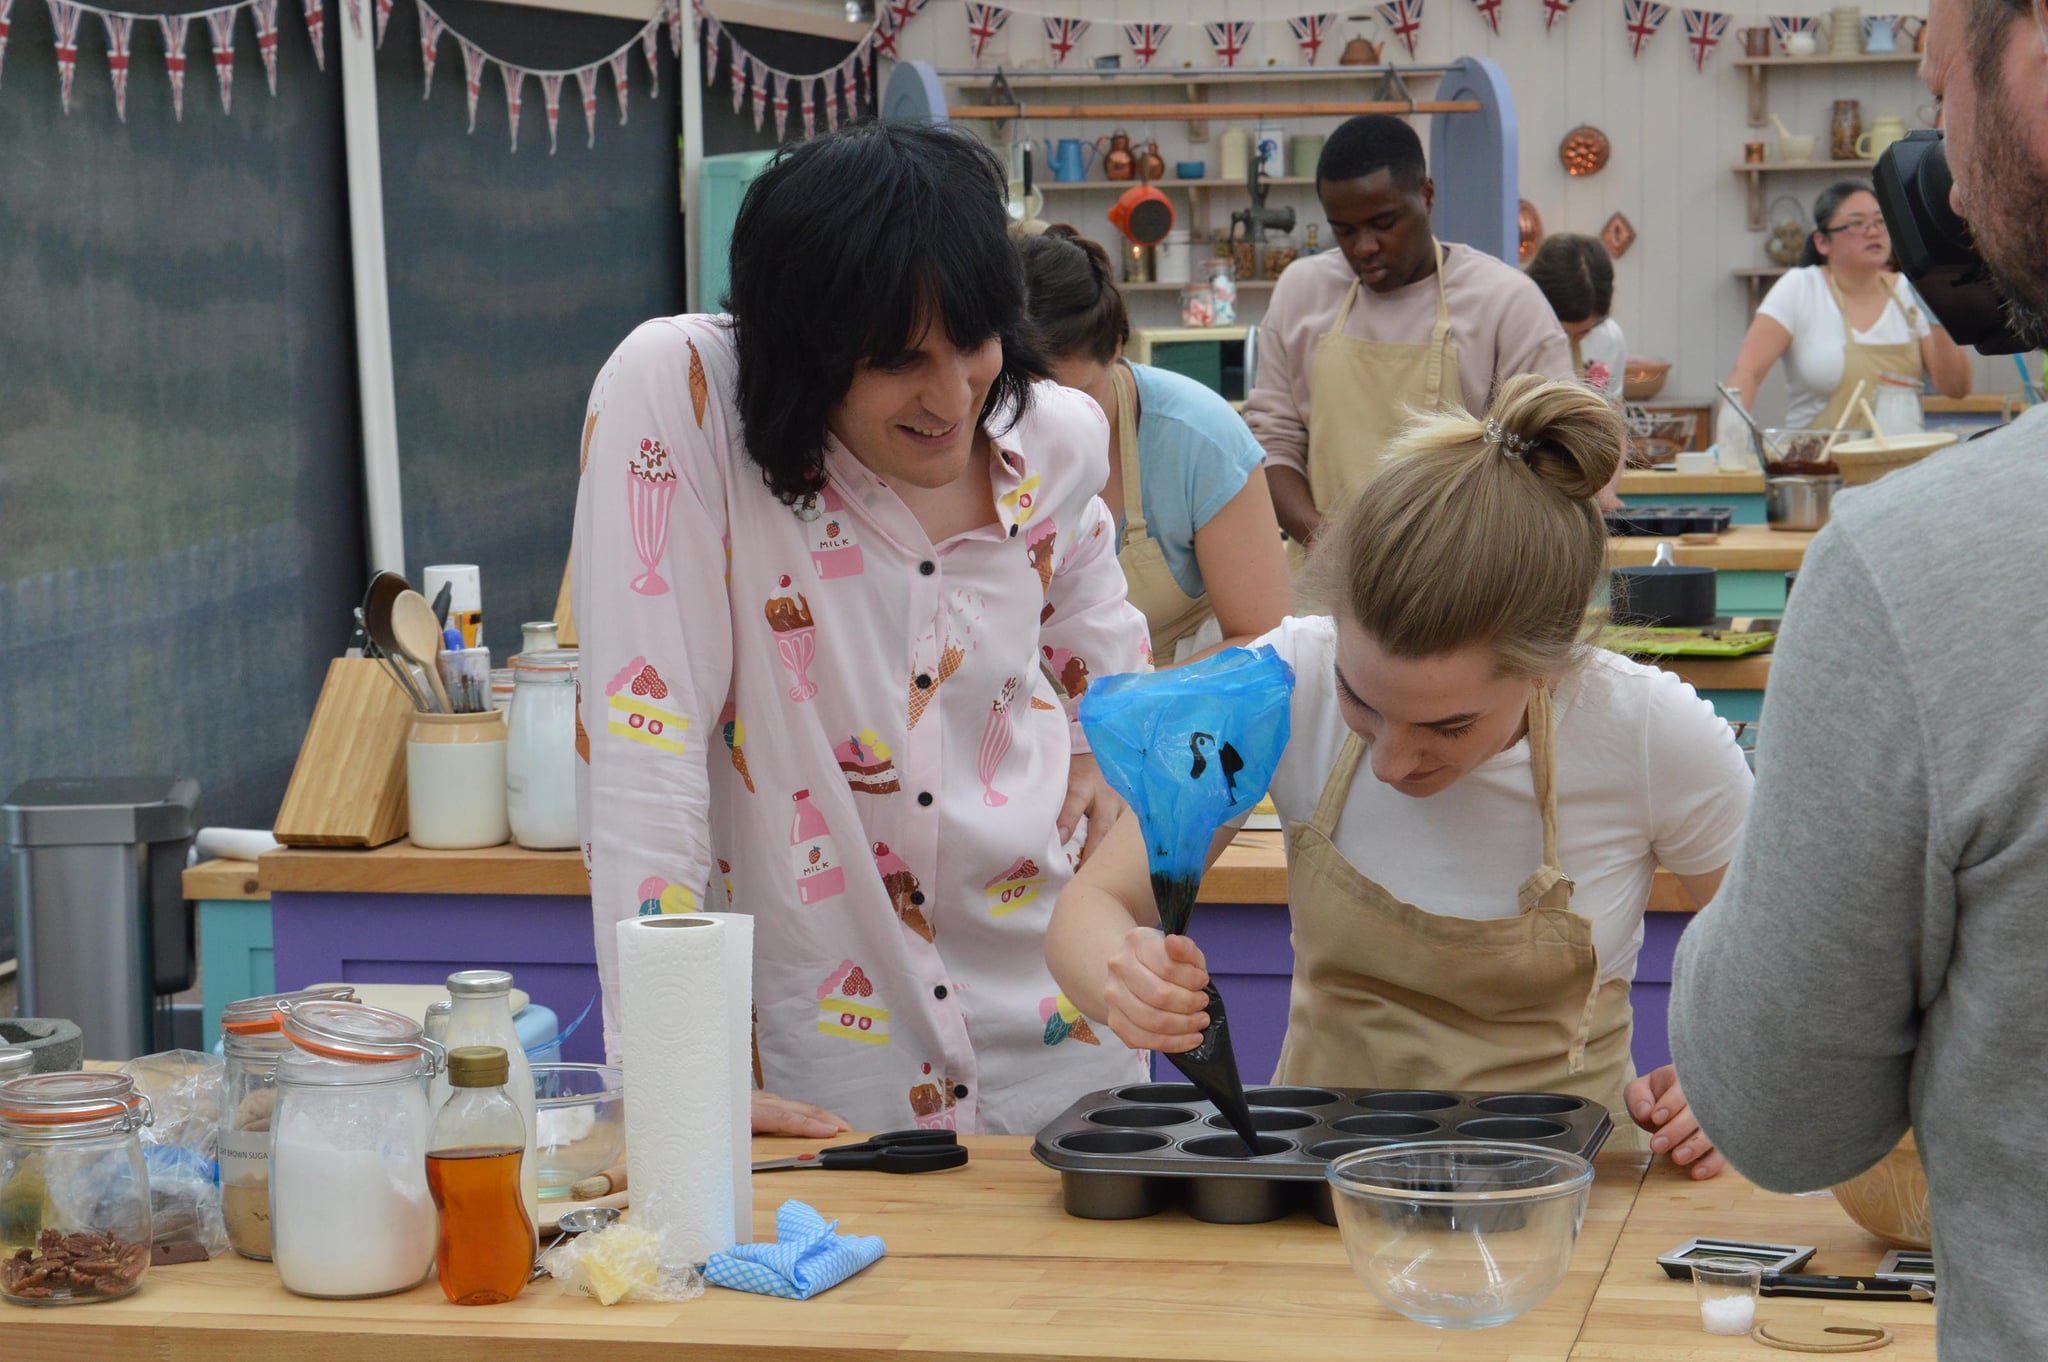 THE GREAT BRITISH BAKE OFF (aka THE GREAT BRITISH BAKING SHOW), Noel Fielding, contestant Julia Chernogorova in 'Caramel', (Season 8, Episode 804, aired September 19, 2017), ph:  Channel Four/ Courtesy Everett Collection